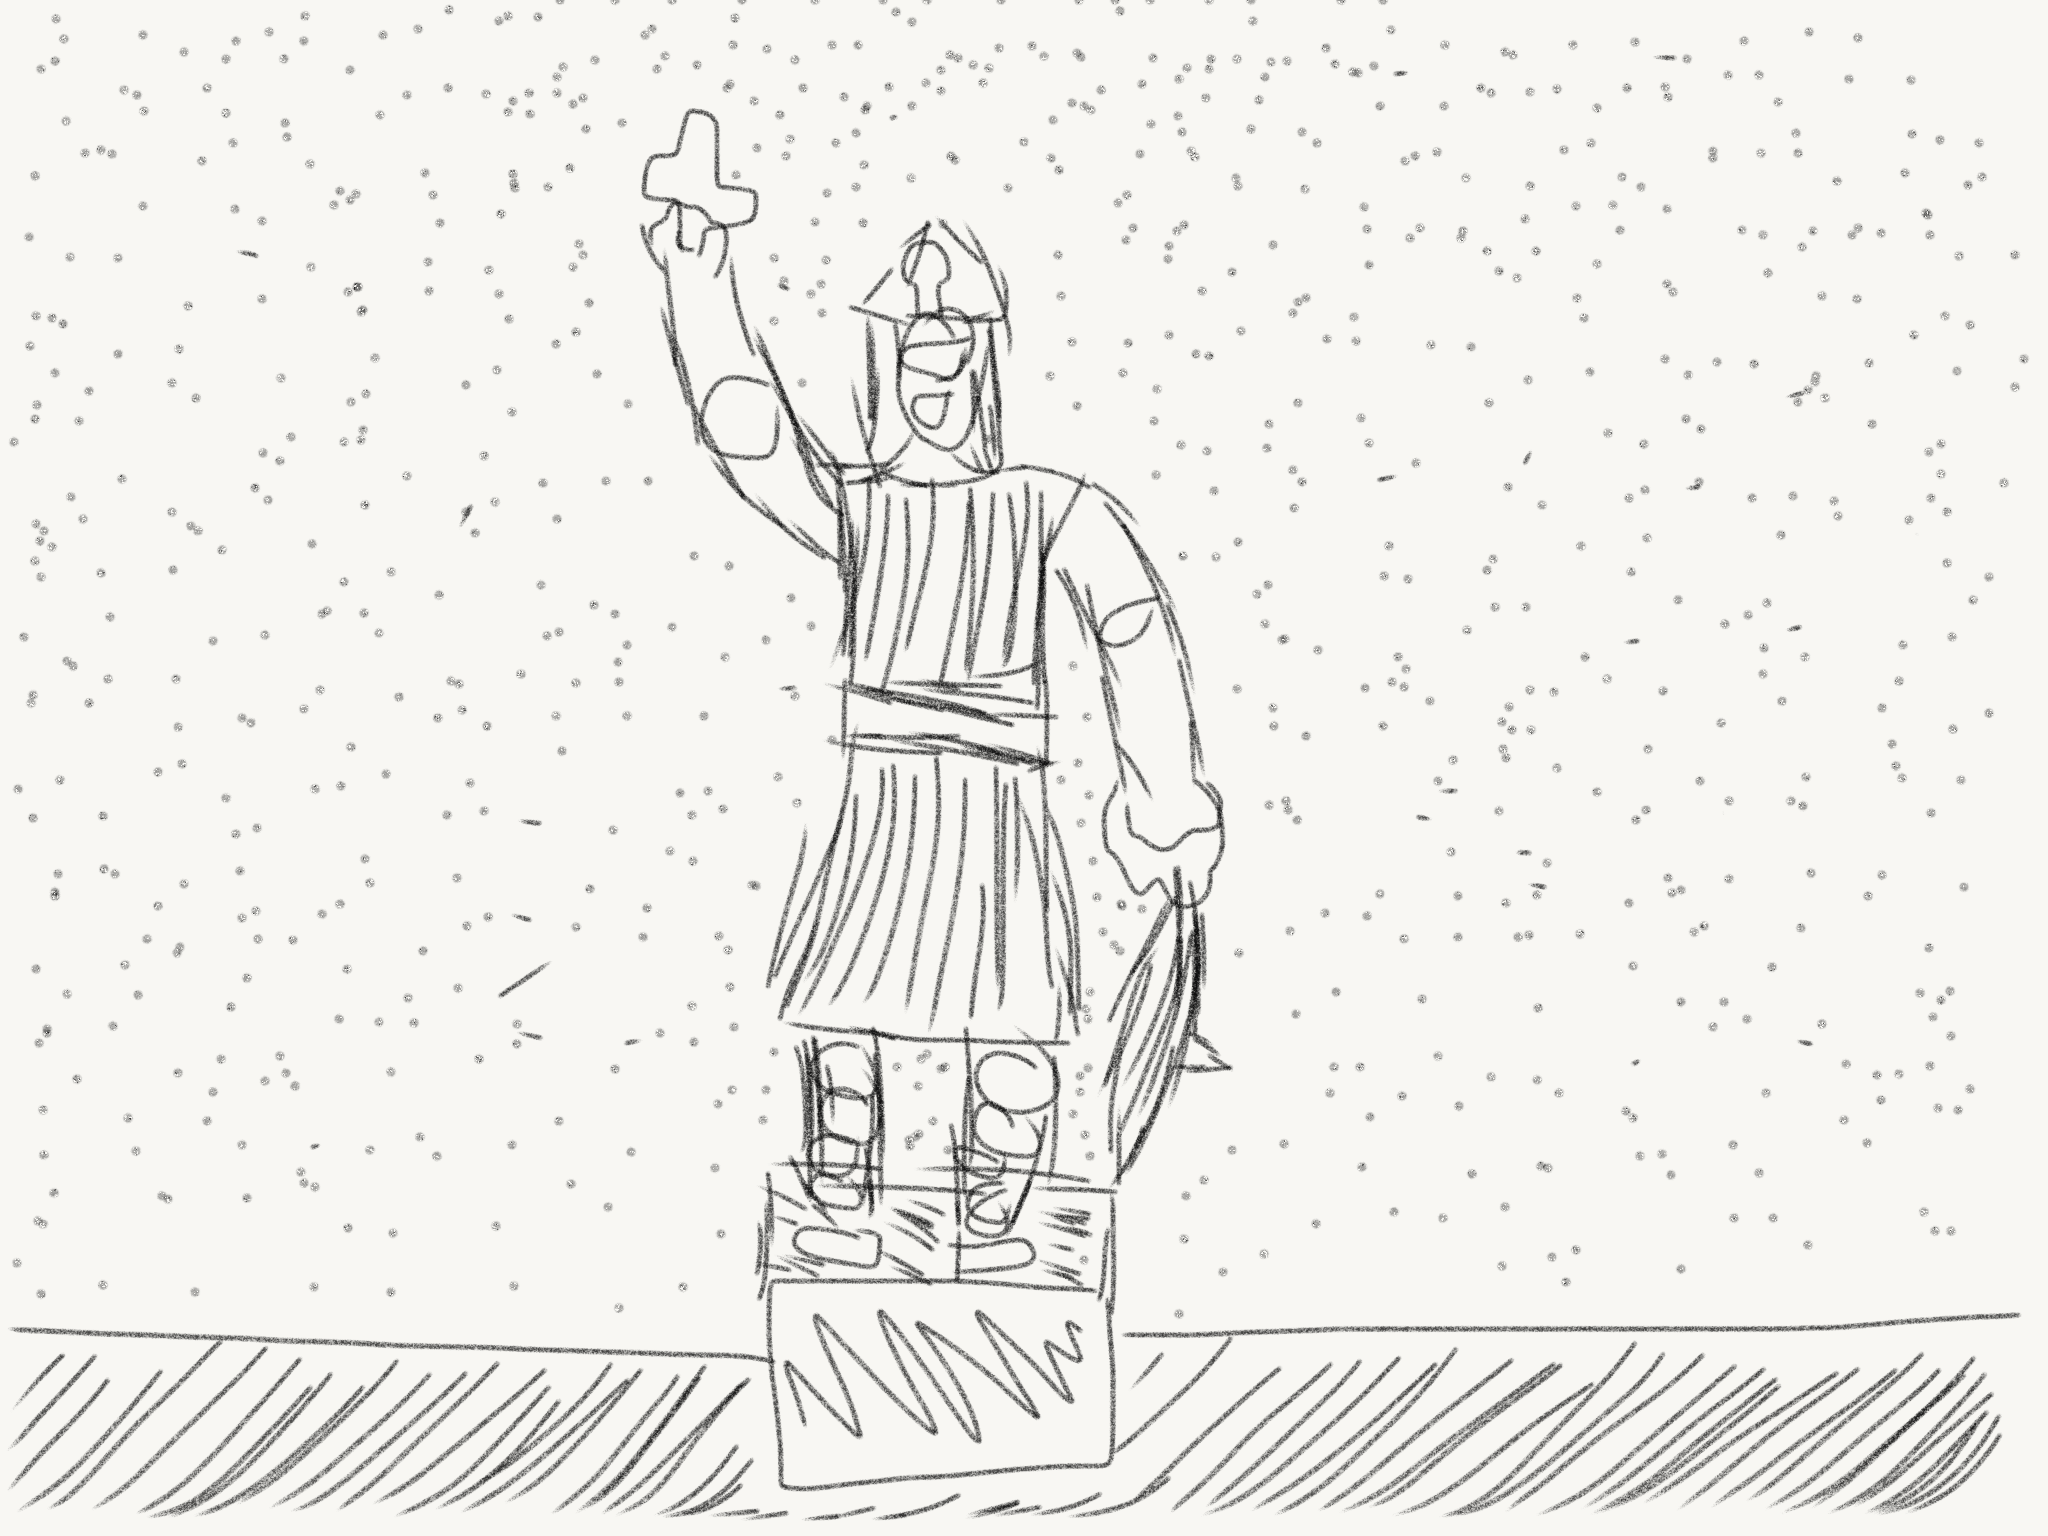 The Sketch of King Alfred